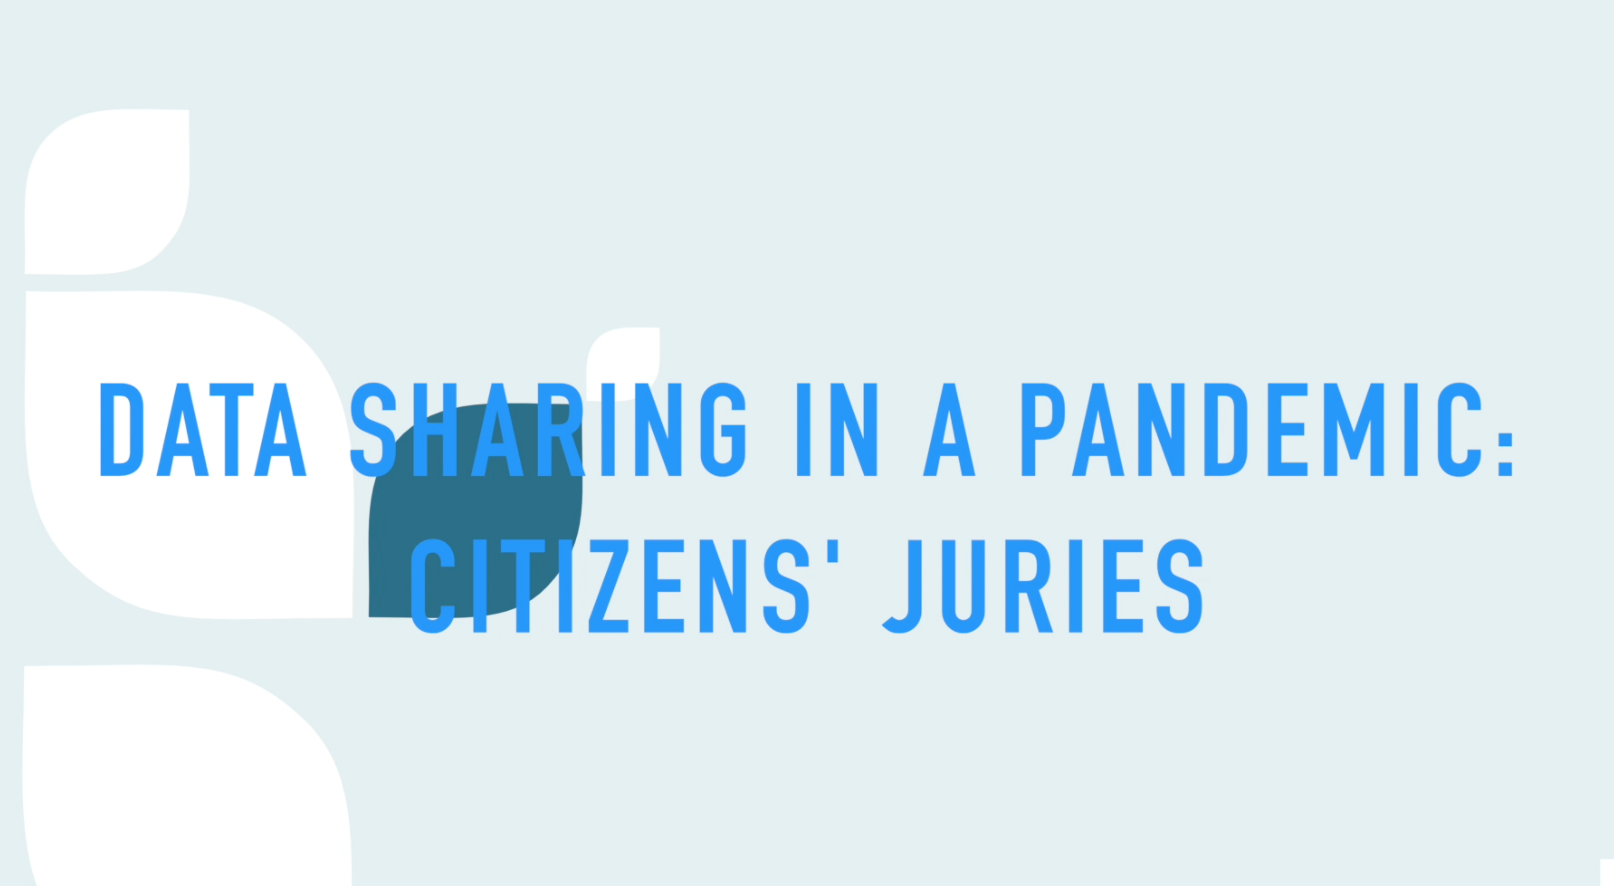 Data Sharing in a Pandemic: Citizens' Juries